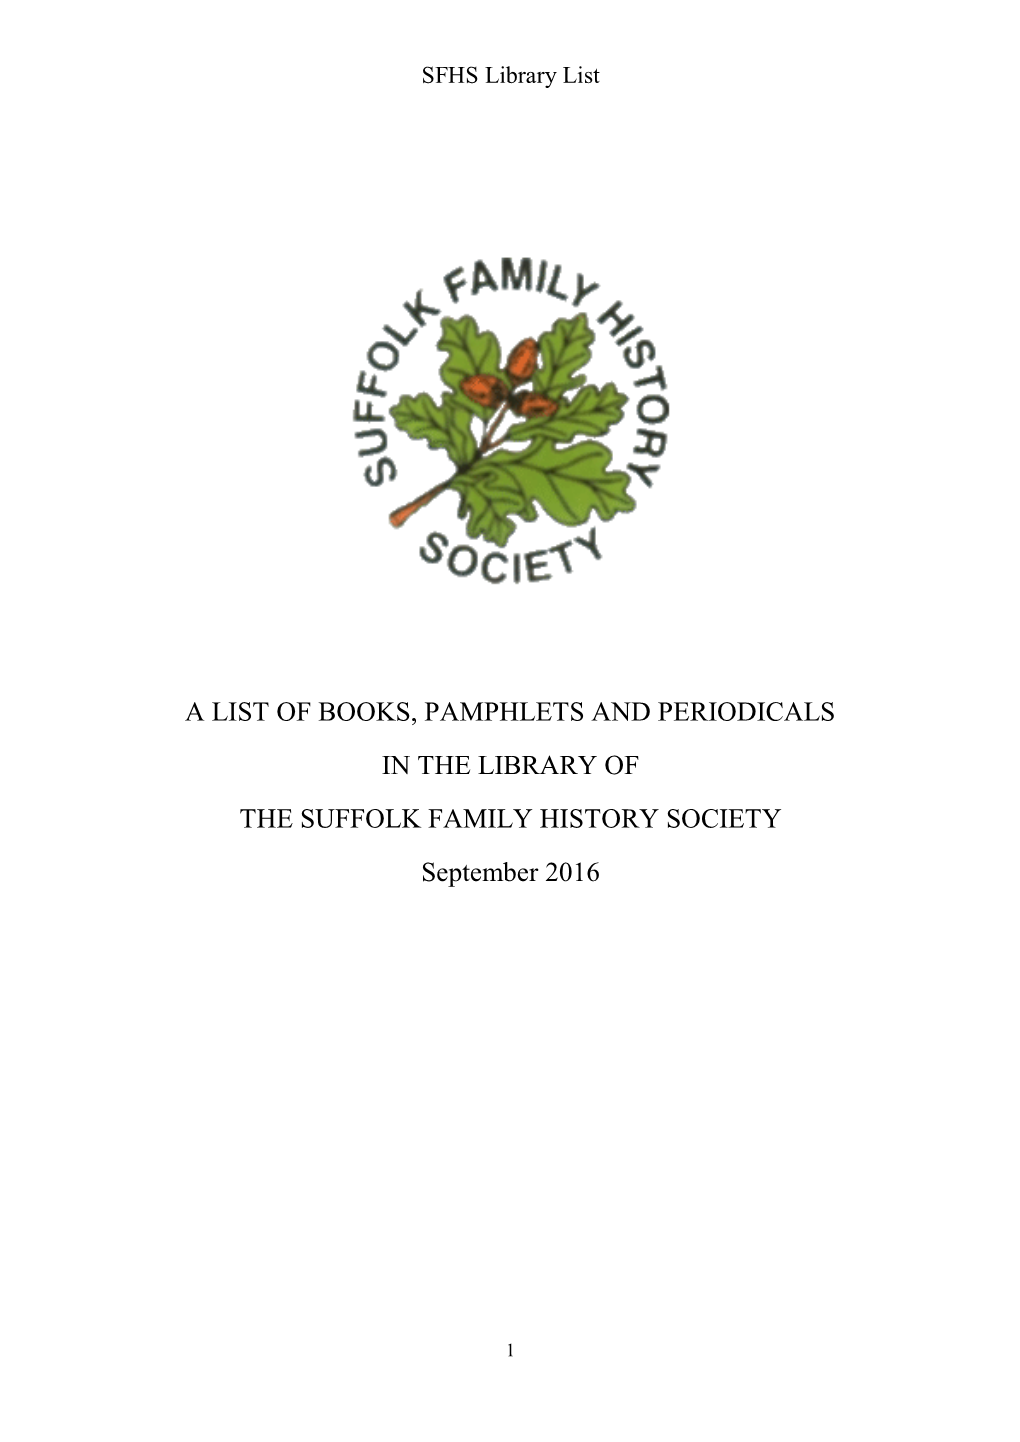 A LIST of BOOKS, PAMPHLETS and PERIODICALS in the LIBRARY of the SUFFOLK FAMILY HISTORY SOCIETY September 2016